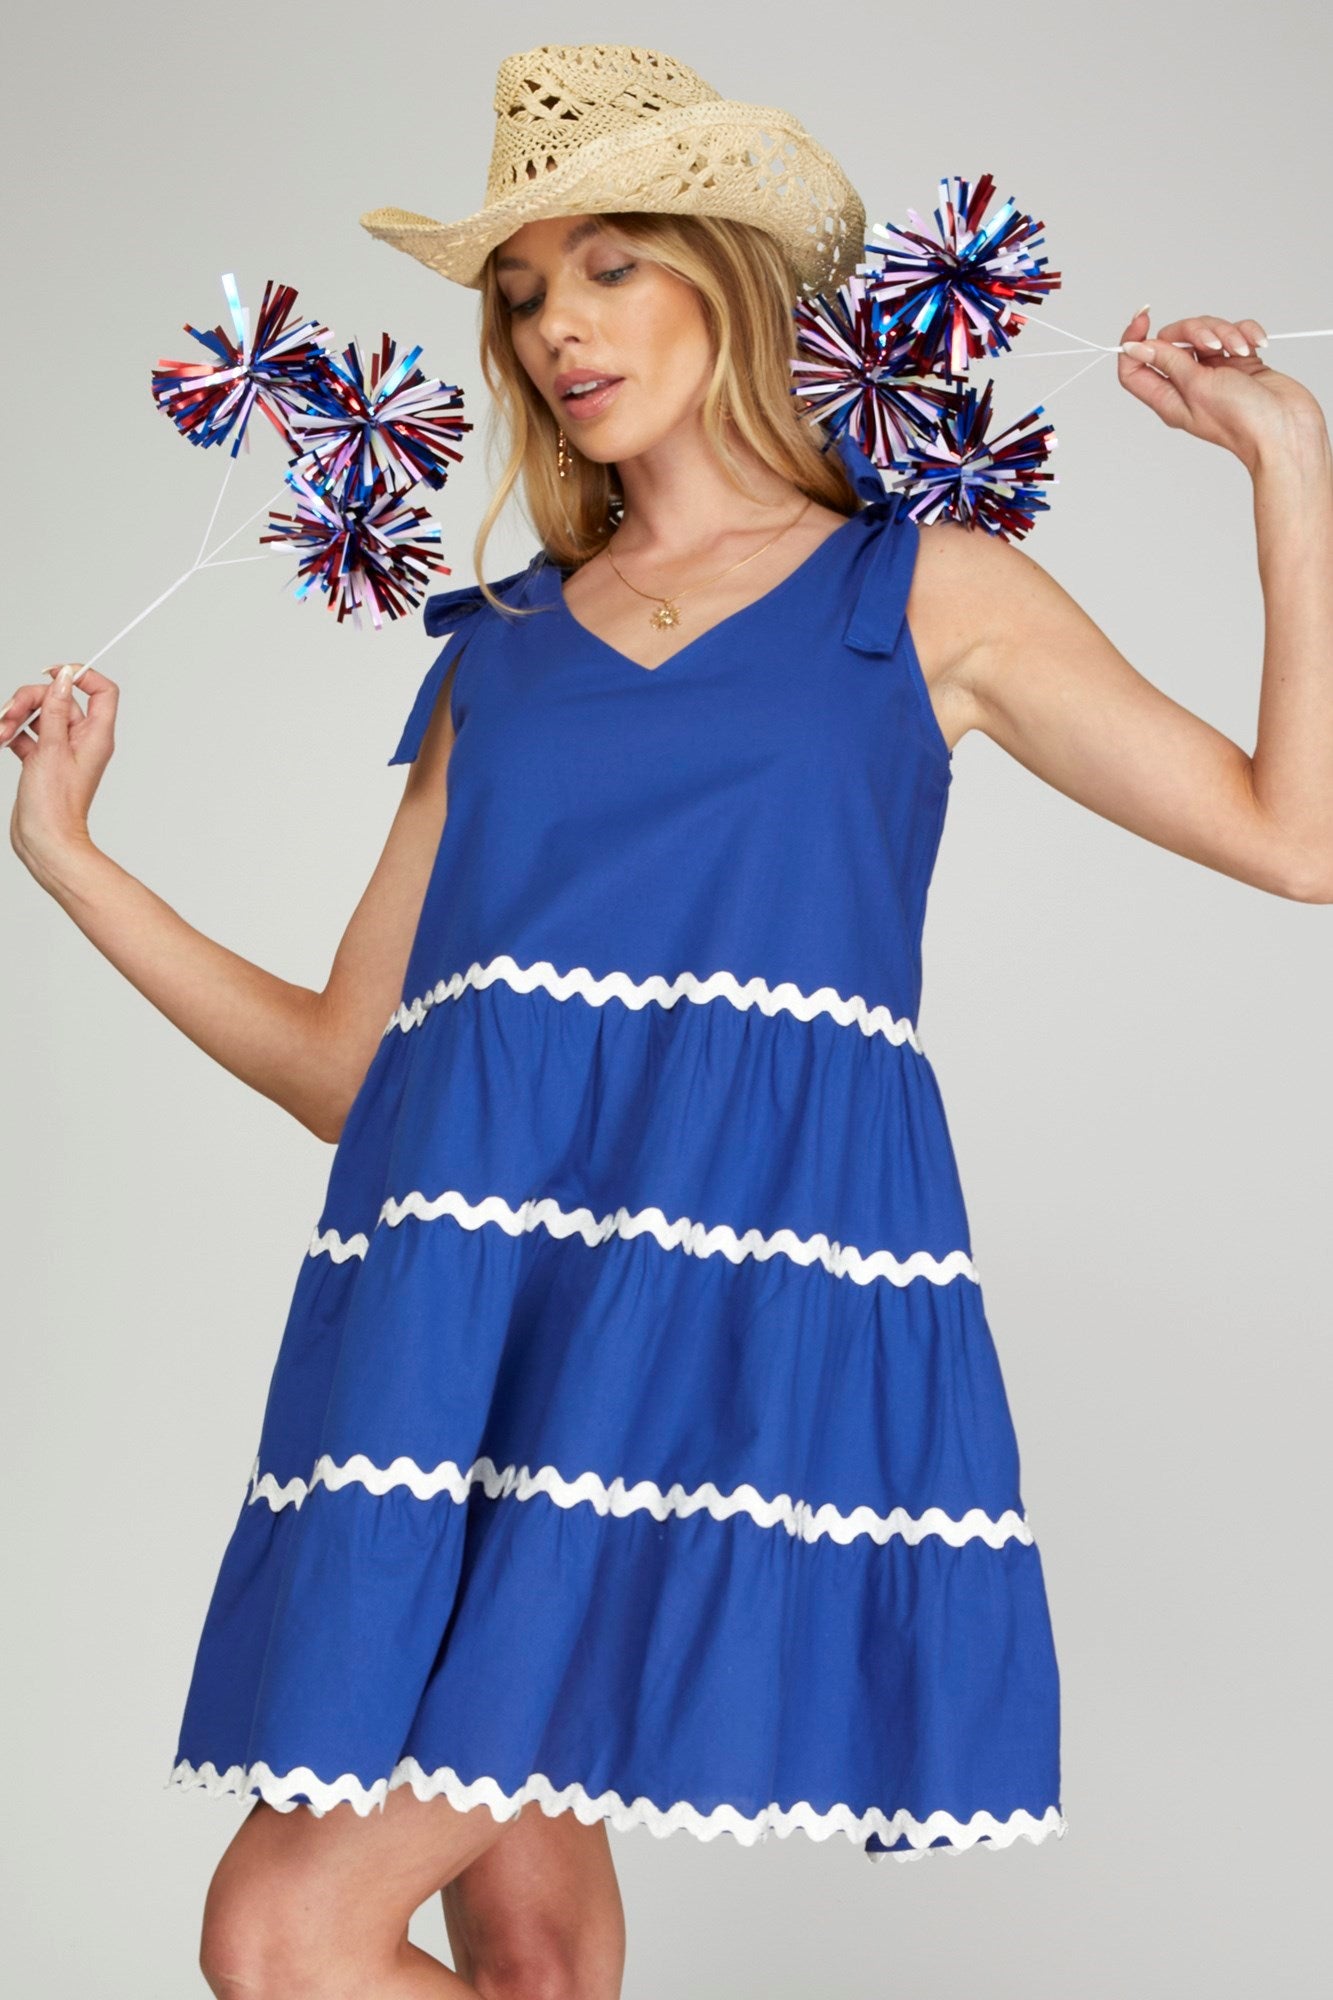 Red and Blue Ric Rac Dress with Shoulder Ties